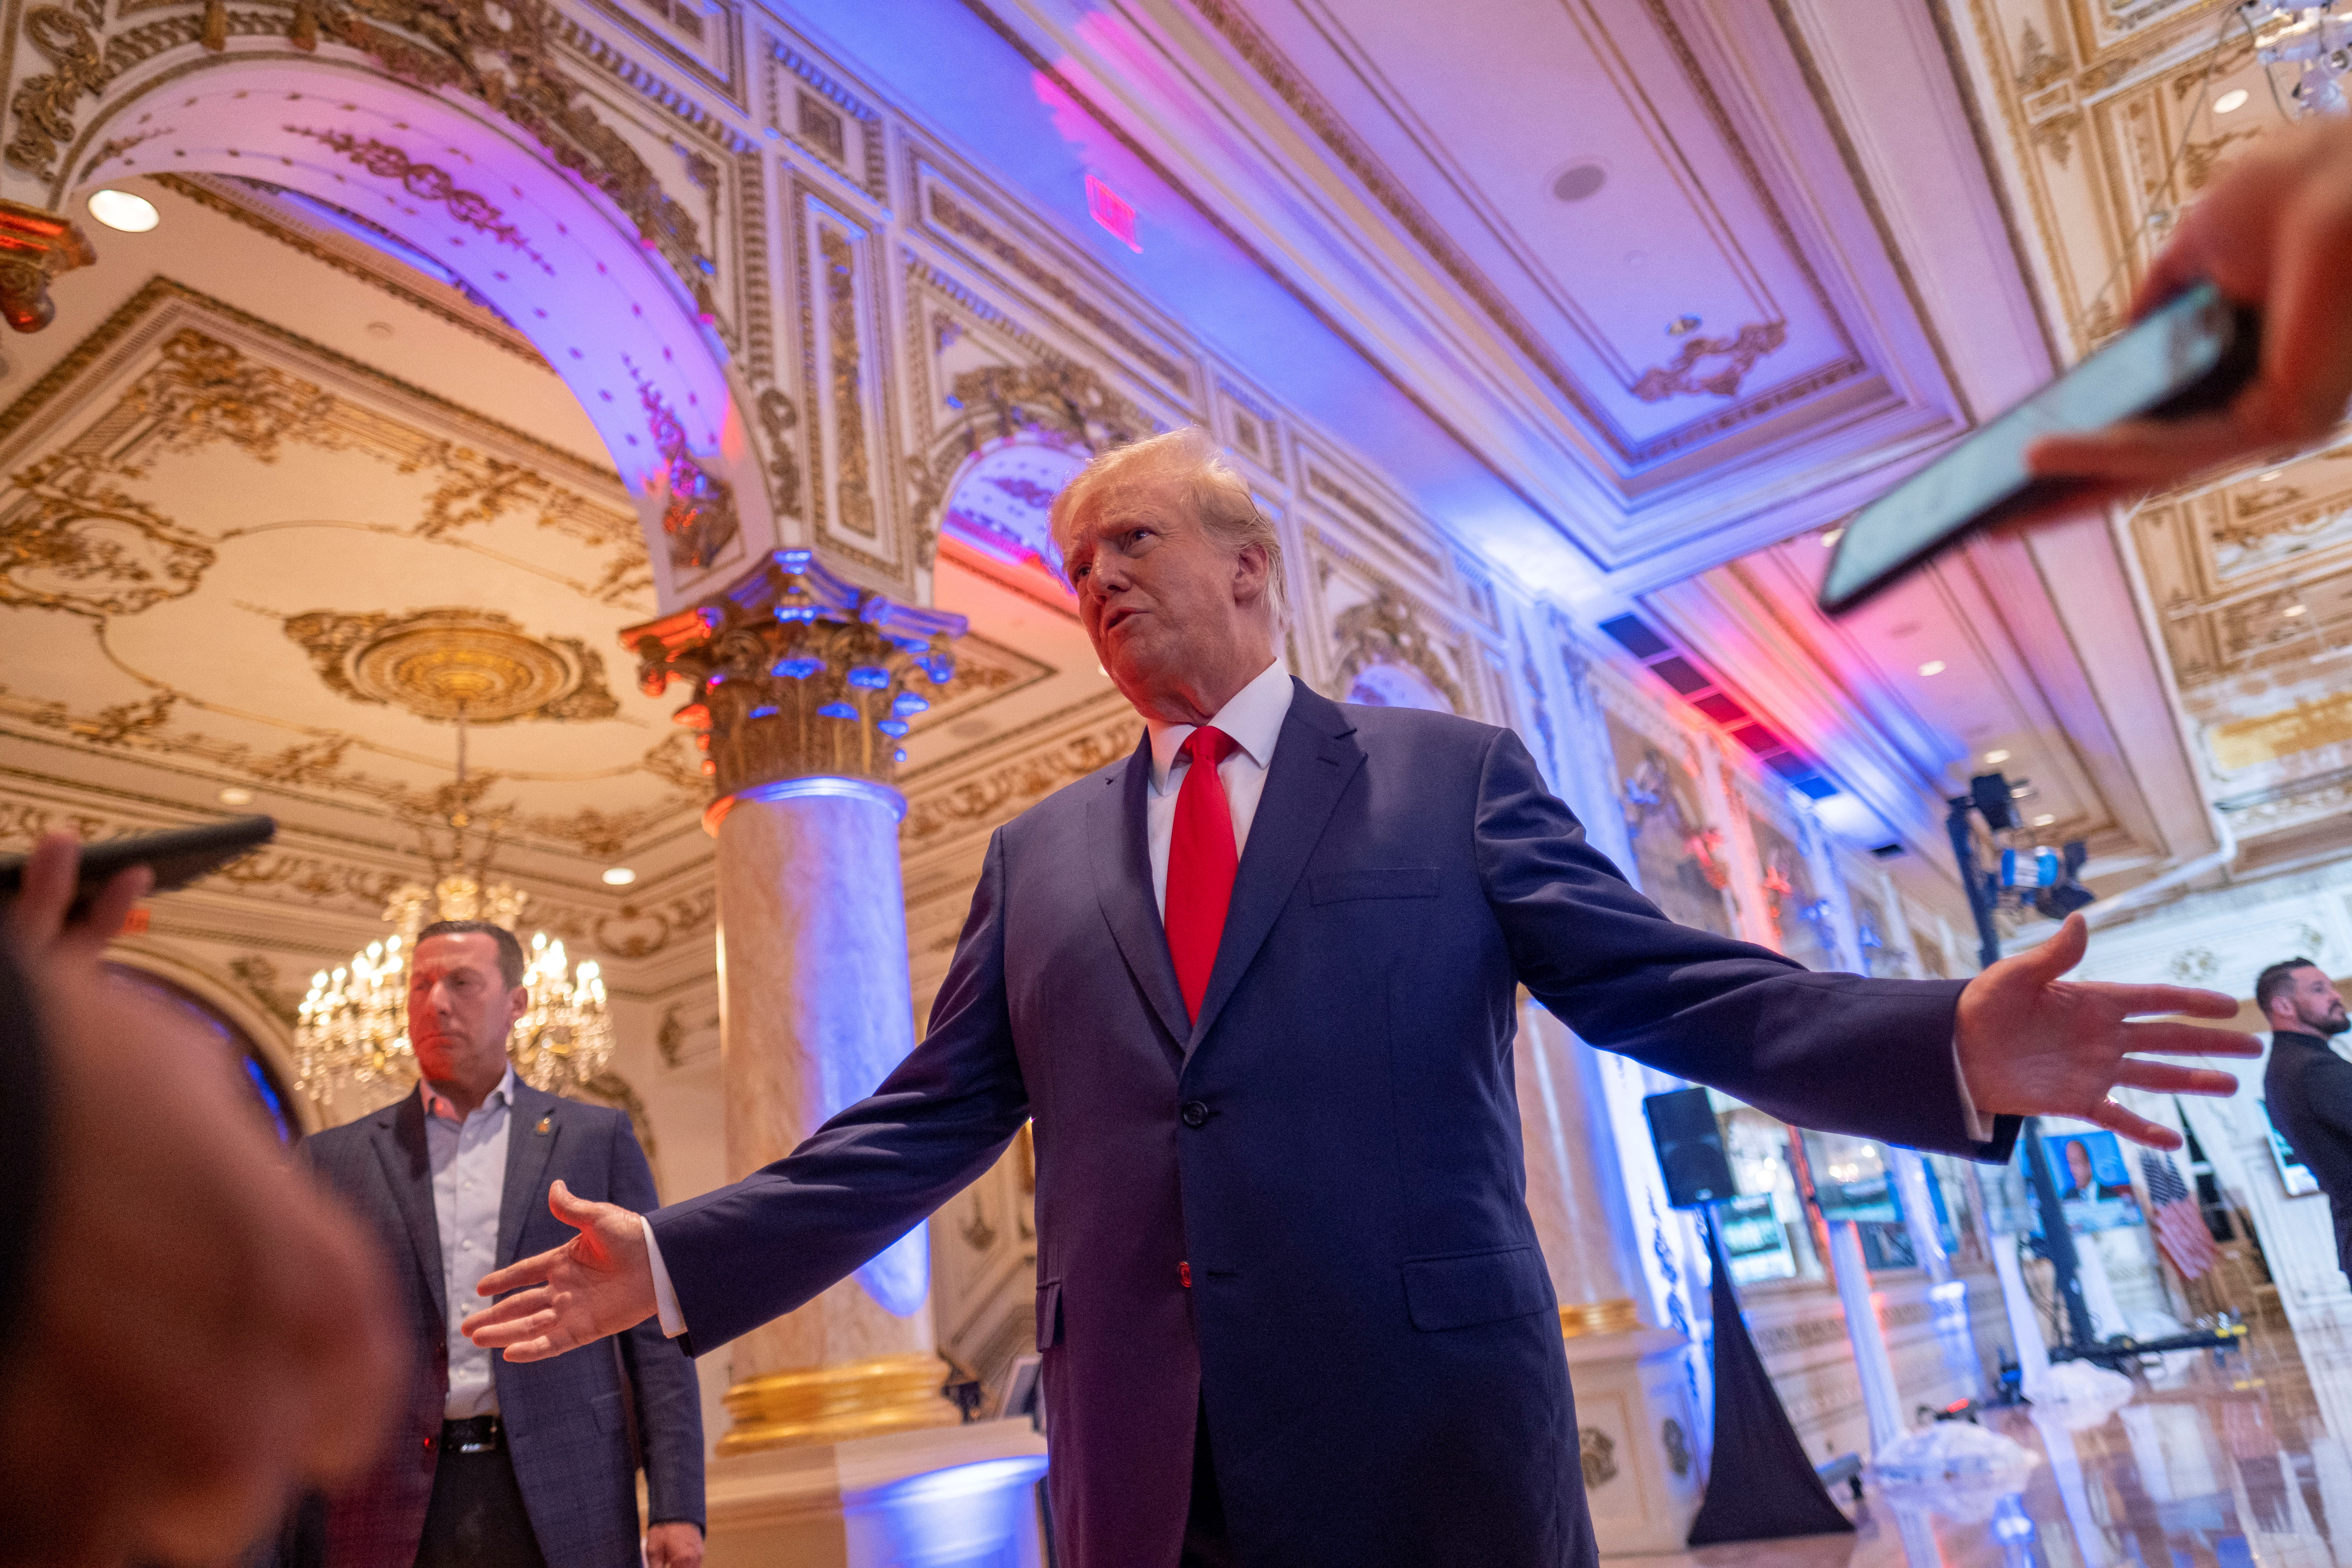 Midterm elections night at Mar-a-Lago in Palm Beach